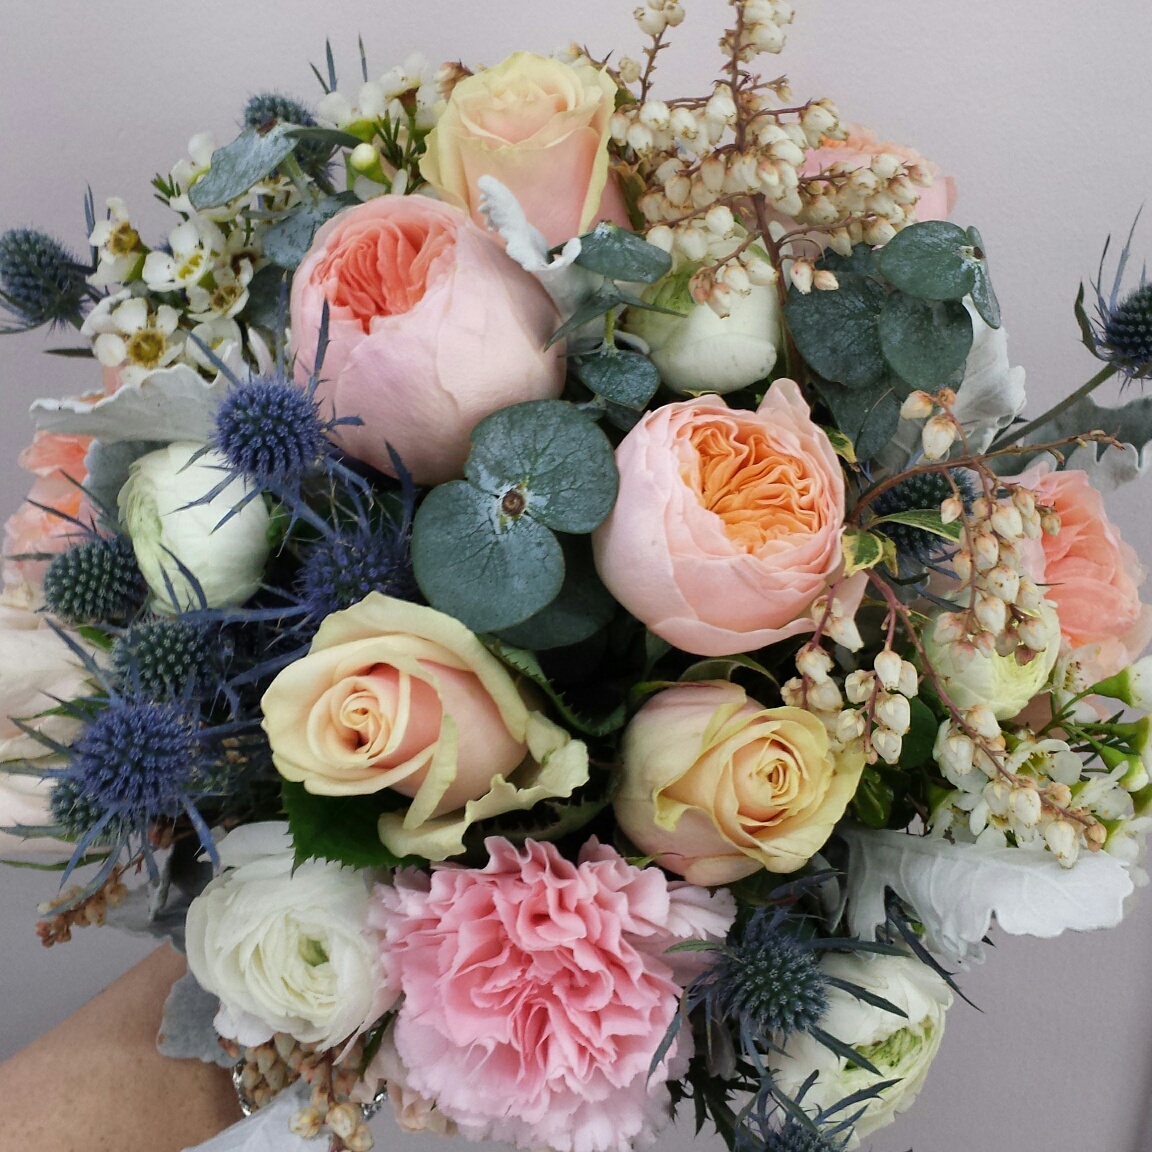 sea holly, garden roses, andromeda and carnation